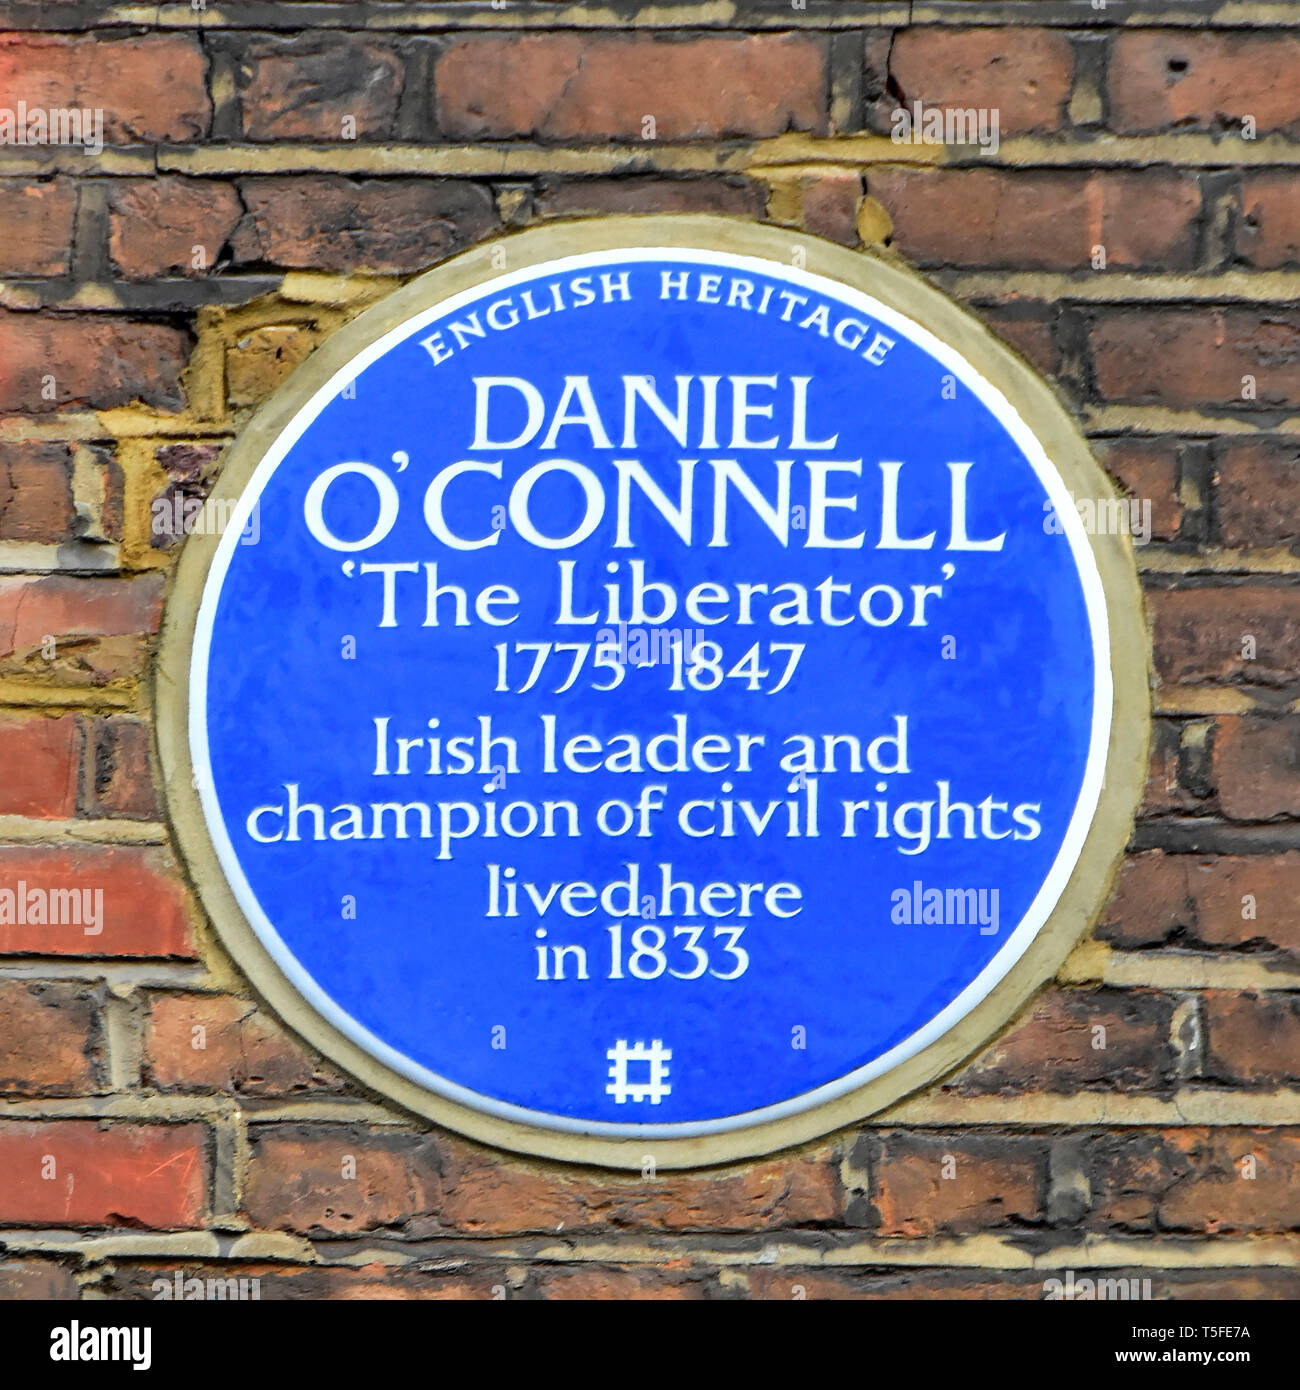 English heritage famous people blue wall plaque for the home & historical fame of Irish leader & champion of civil rights who lived in London England Stock Photo